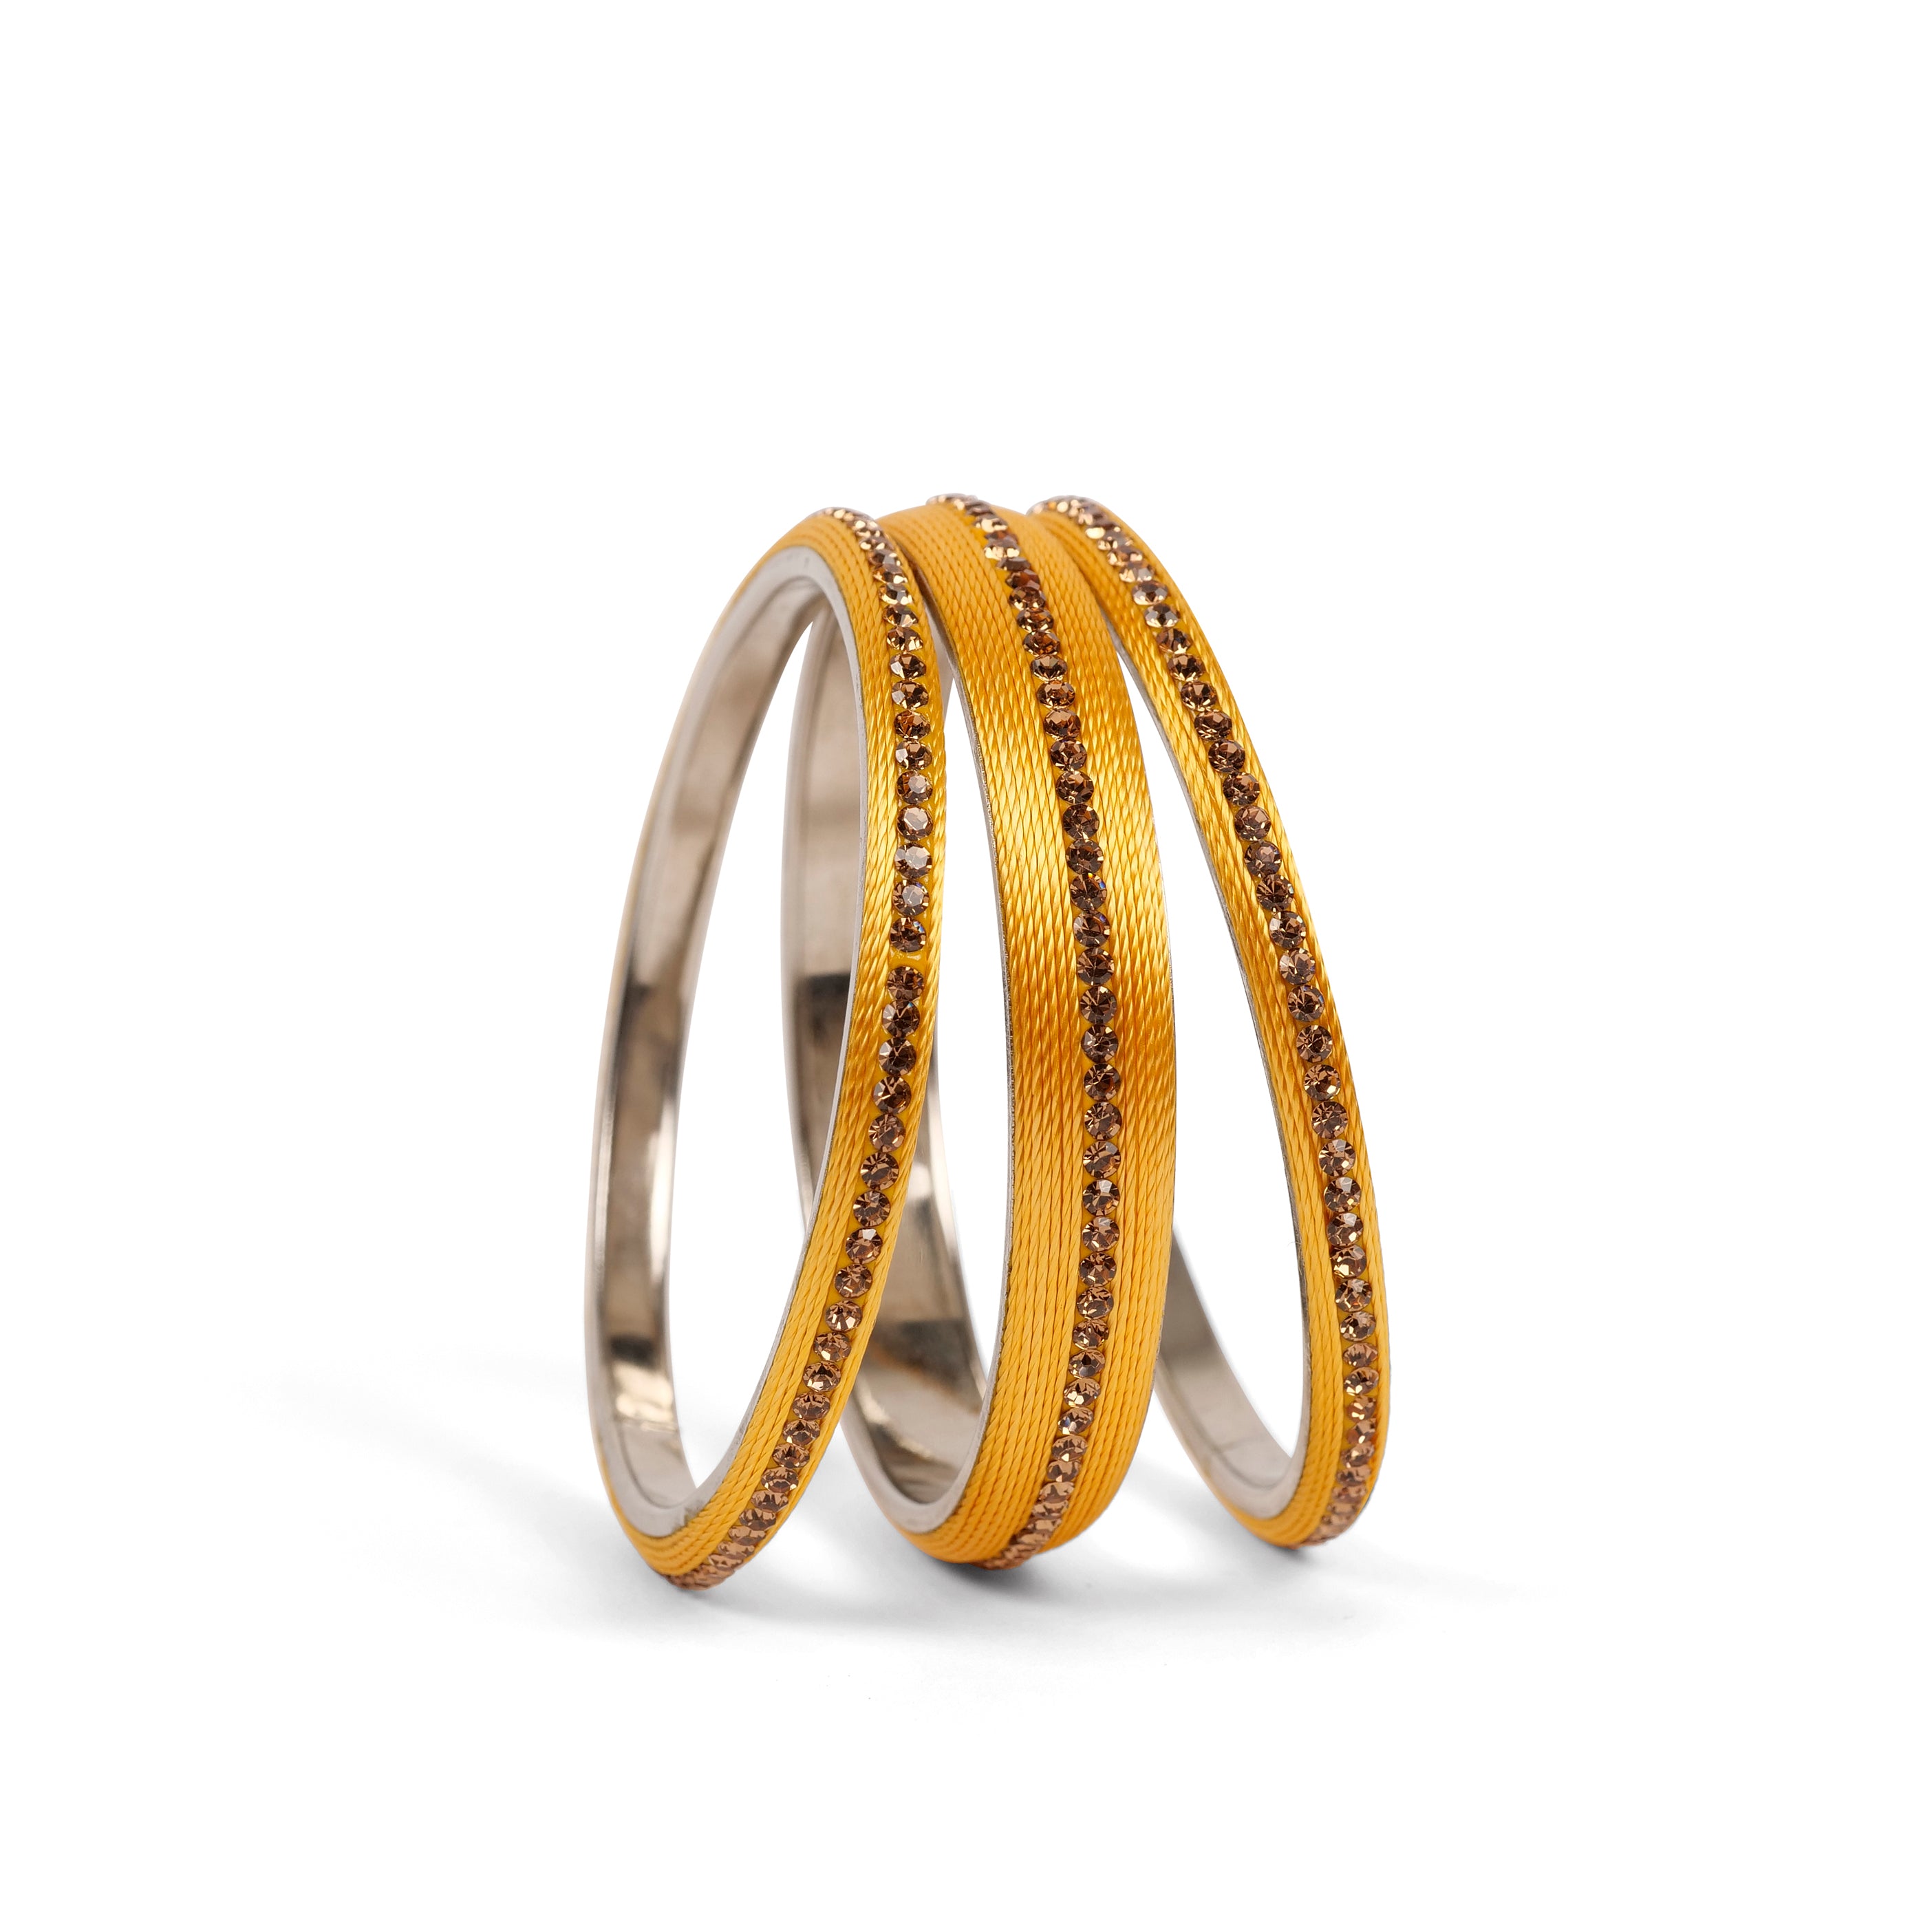 Set of 3 Thread Bangles in Yellow